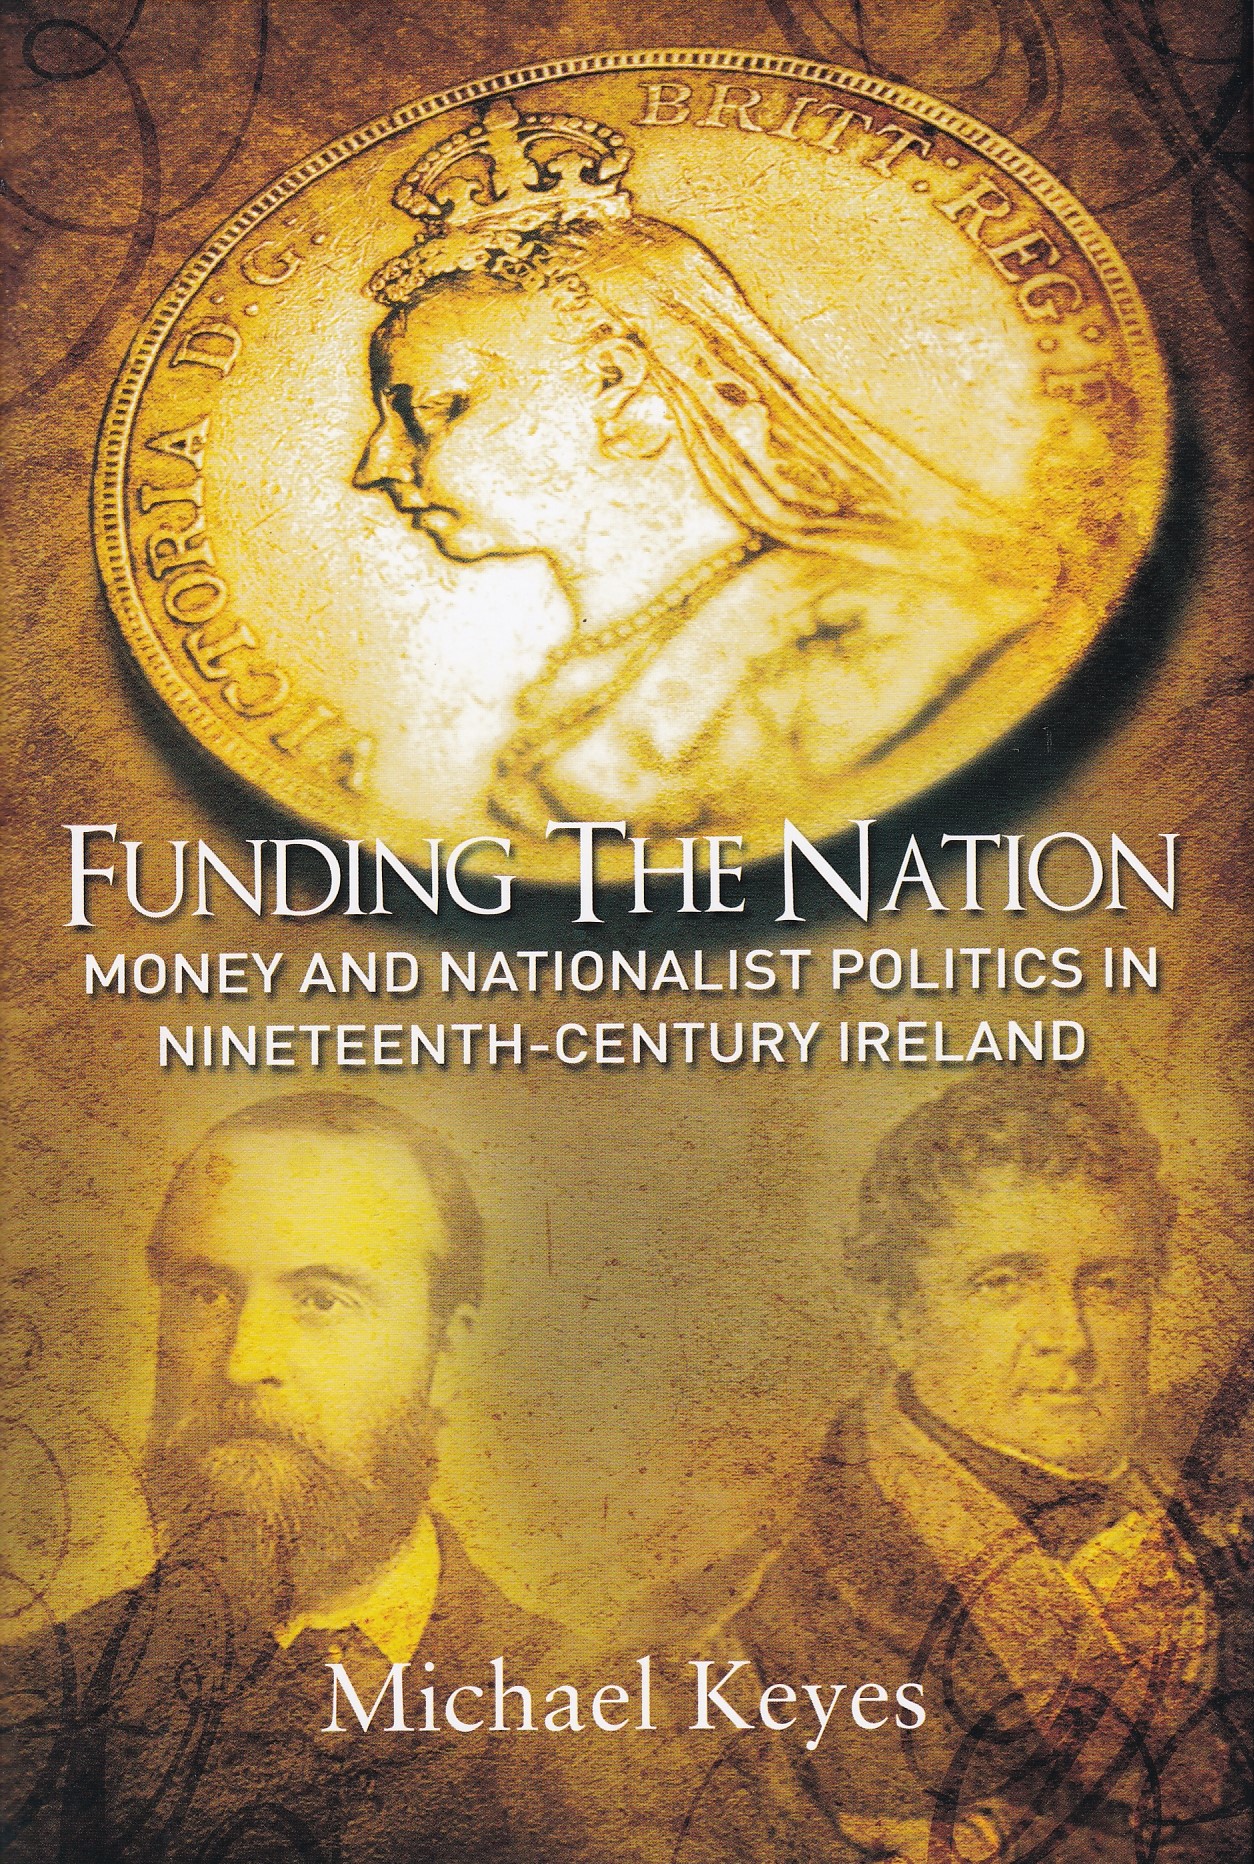 Funding The Nation: Money and Nationalist Politics in Nineteenth-Century Ireland | Michael Keyes | Charlie Byrne's